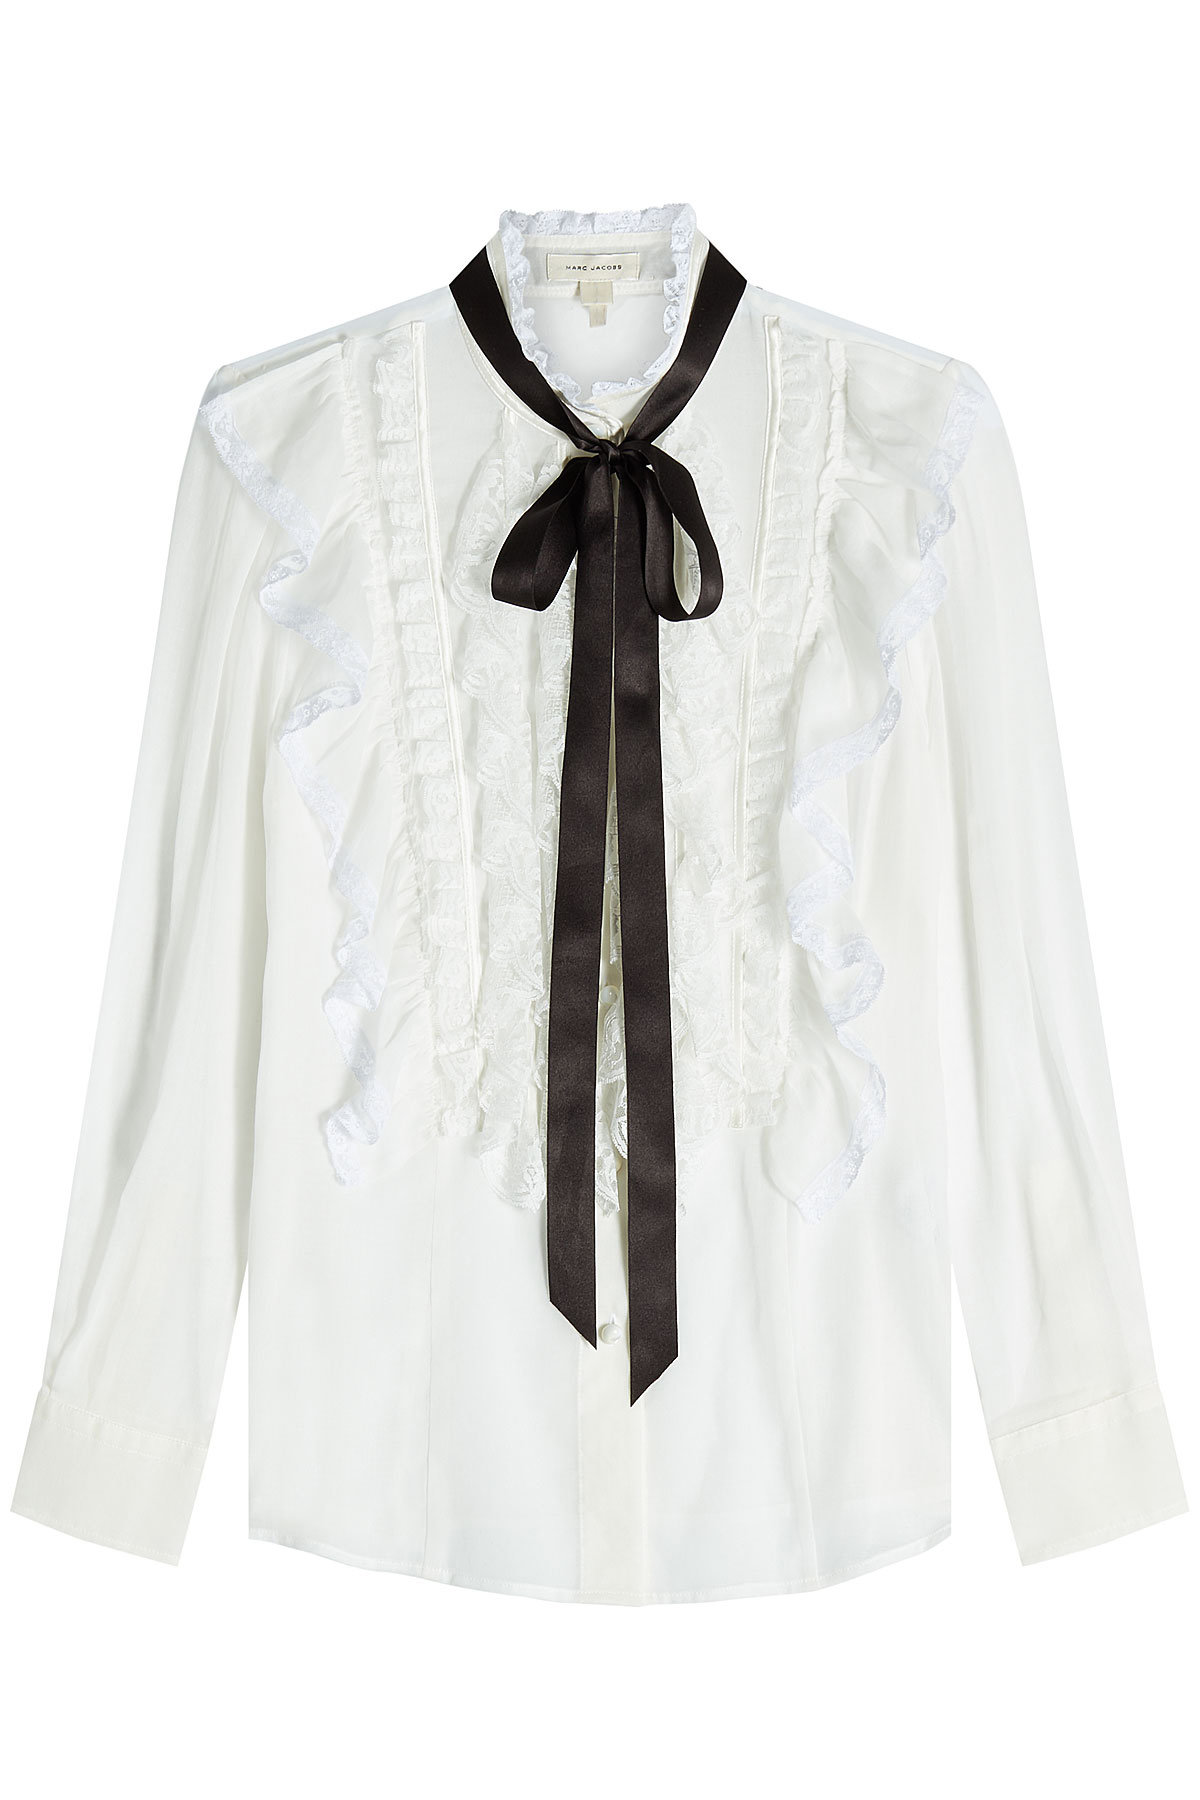 Marc Jacobs - Cotton Ruffle Blouse with Tie